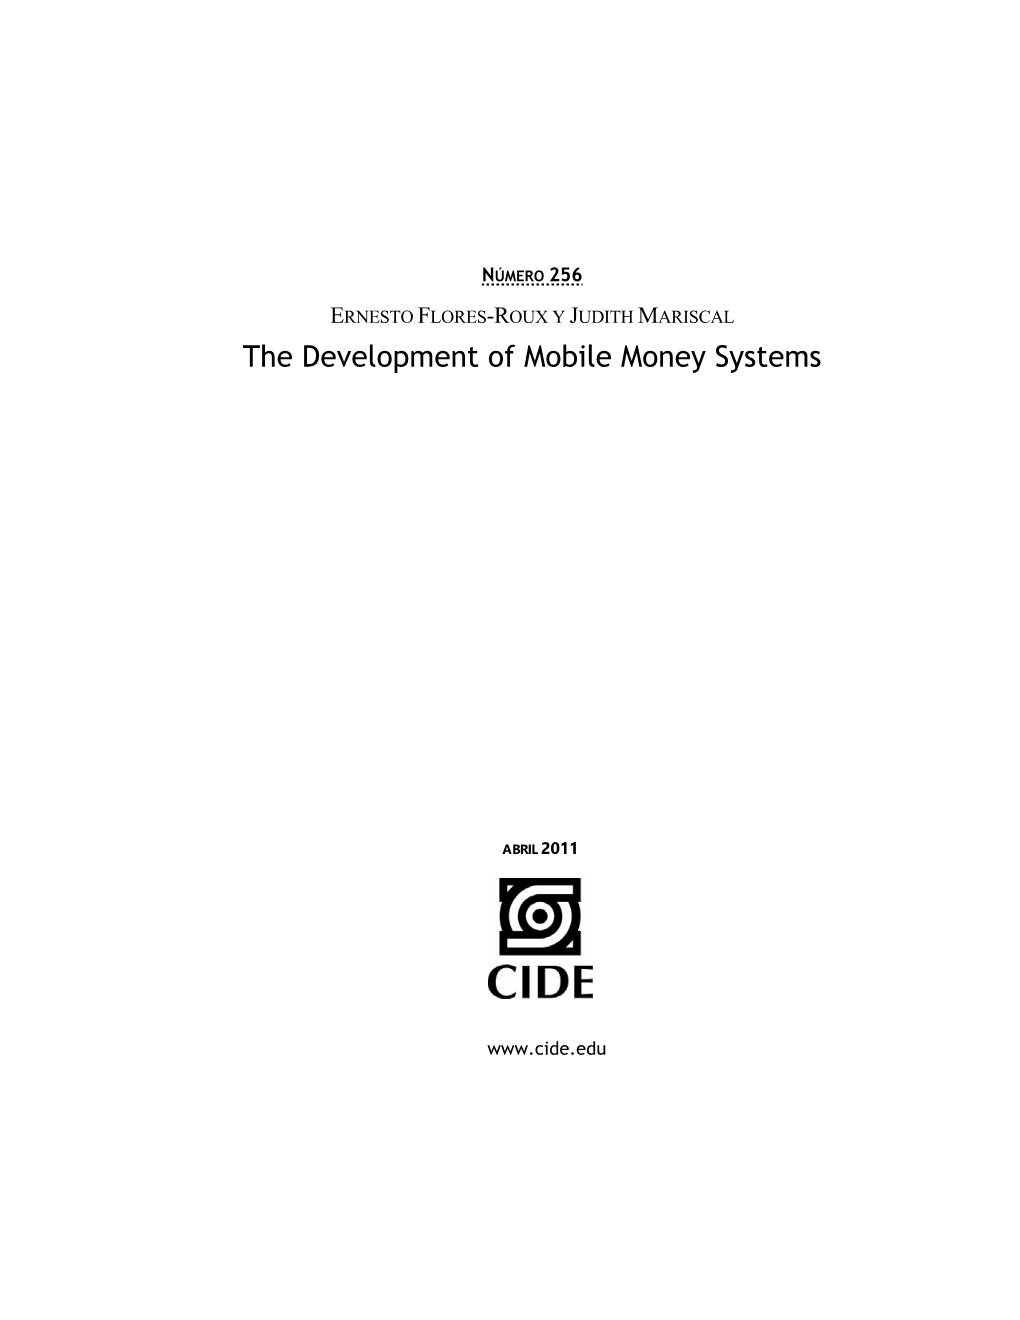 The Development of Mobile Money Systems